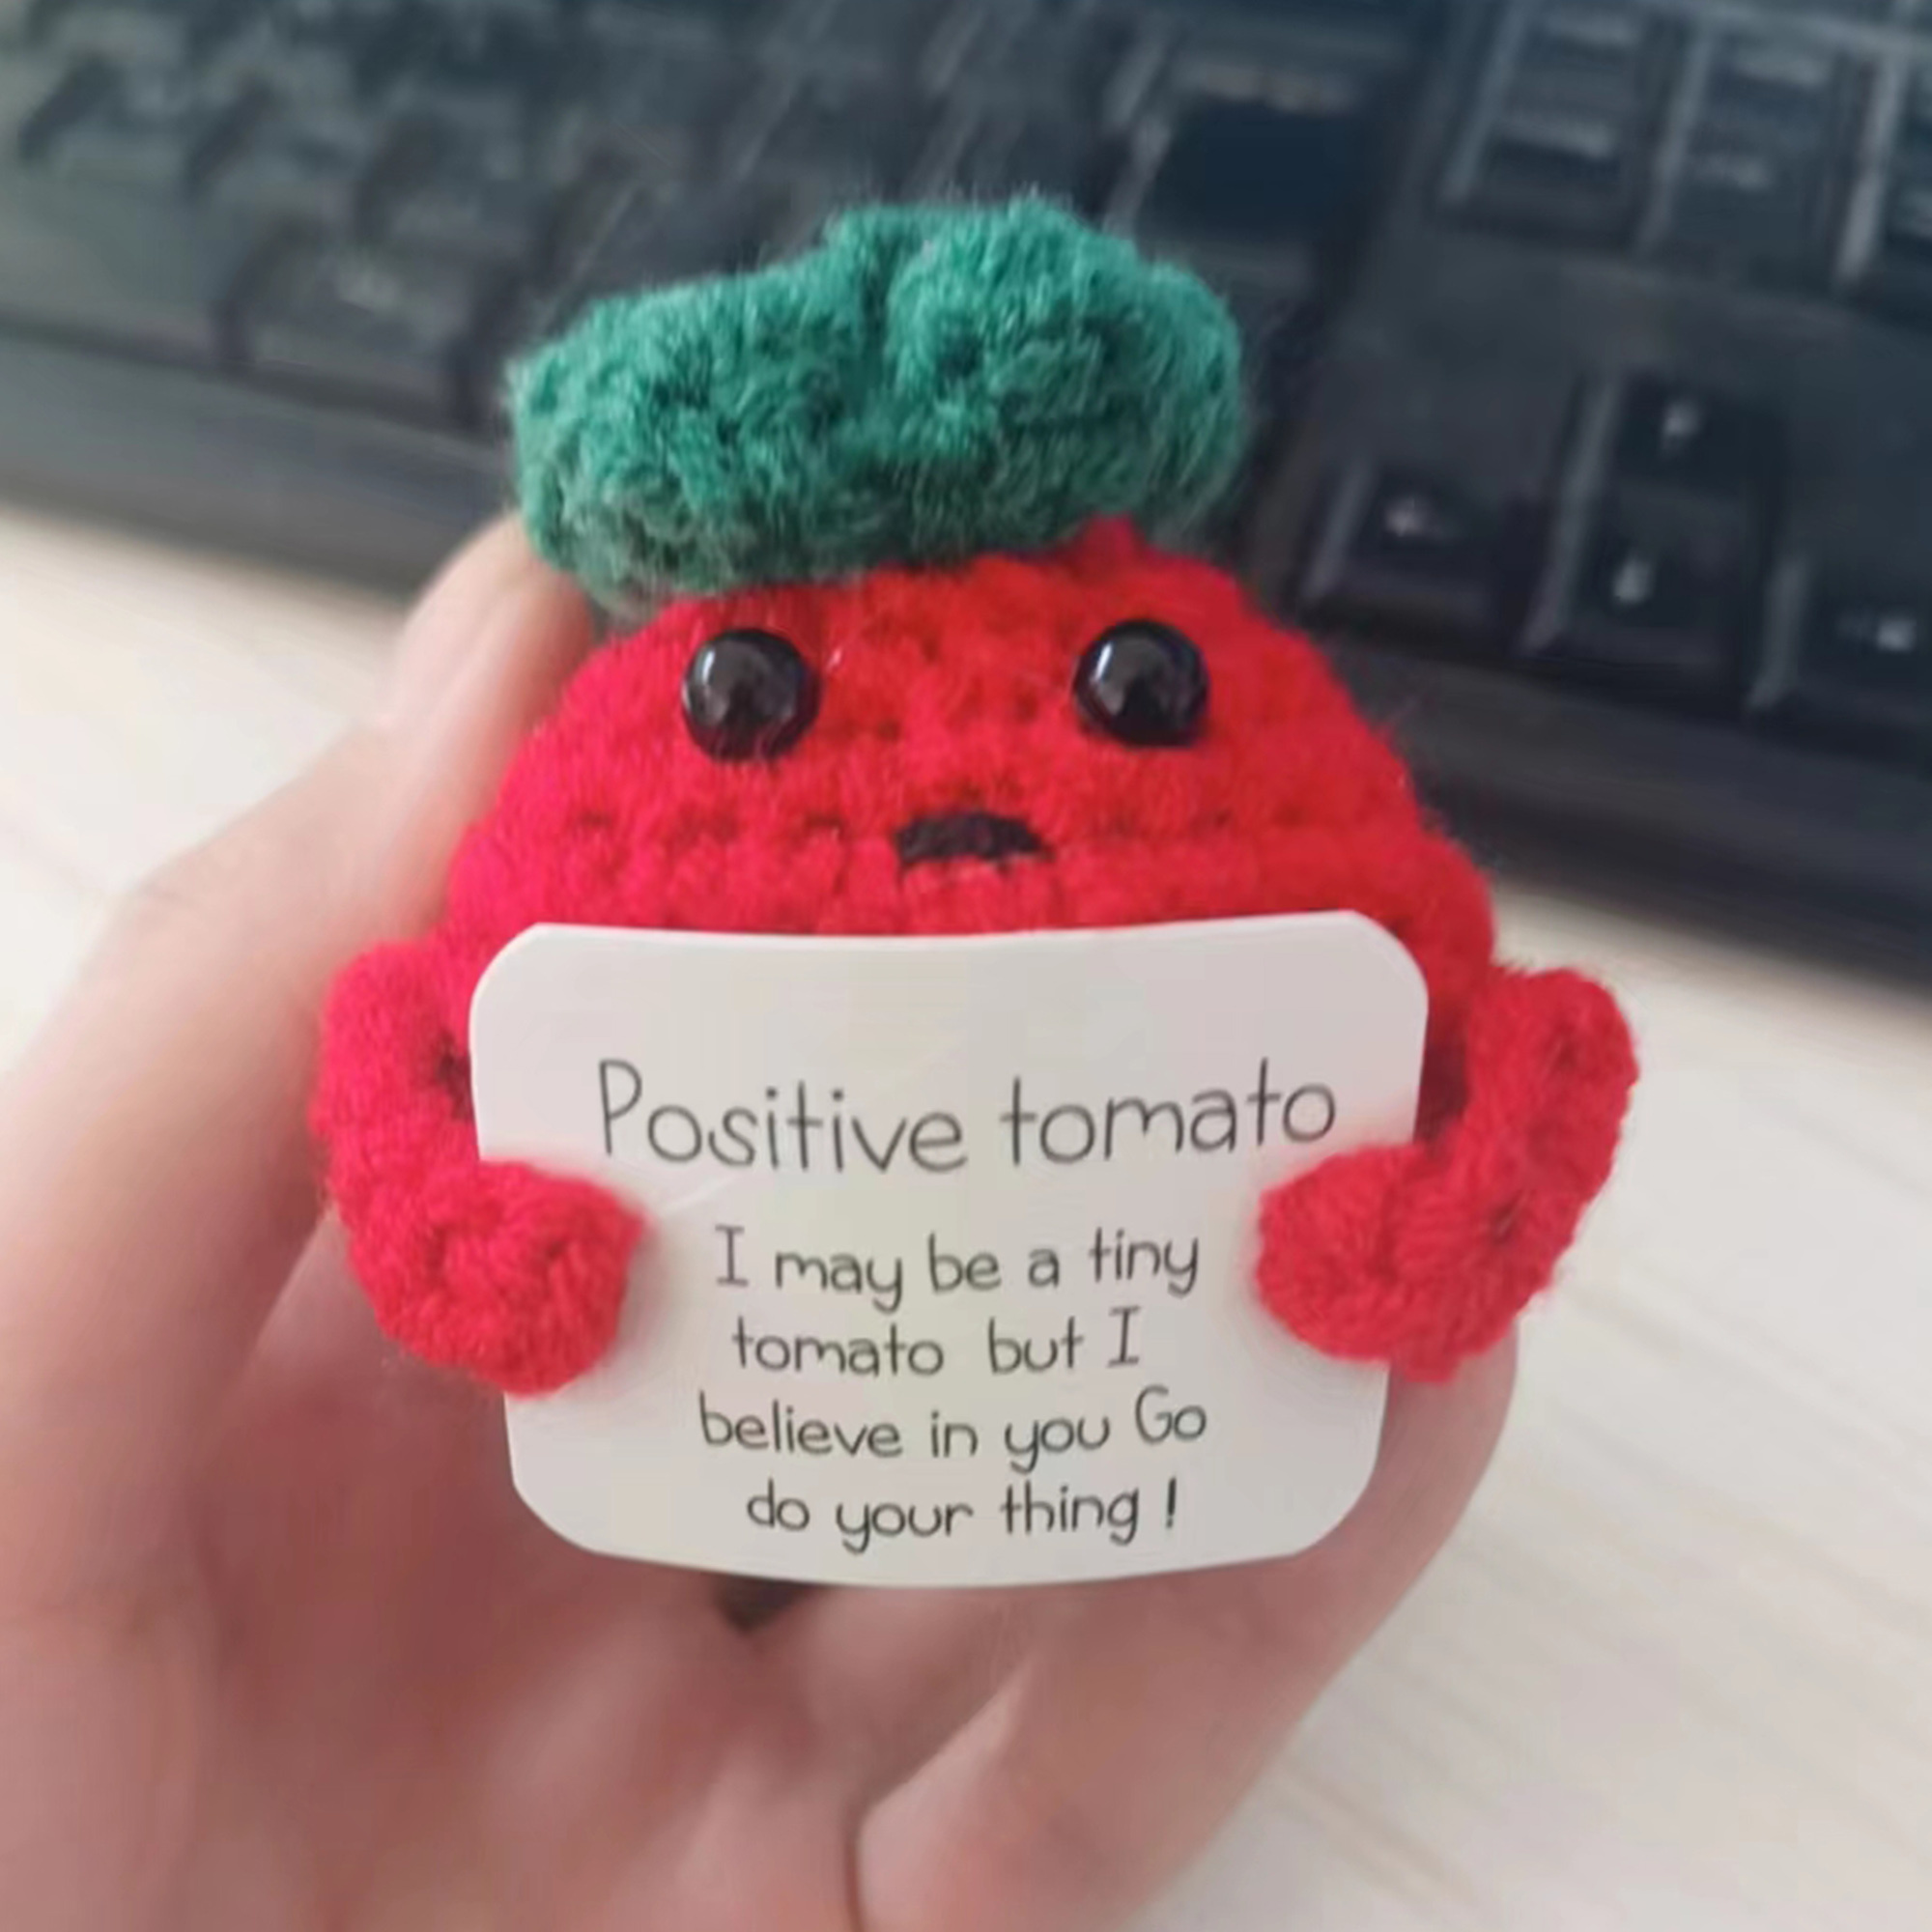 

Mini Fun Tomatoes, Cute Crochet Knitted Tomato Toys, Party Gifts, Knitted Plush Fruits, Birthday And Christmas Decorations To Encourage Positive Energy